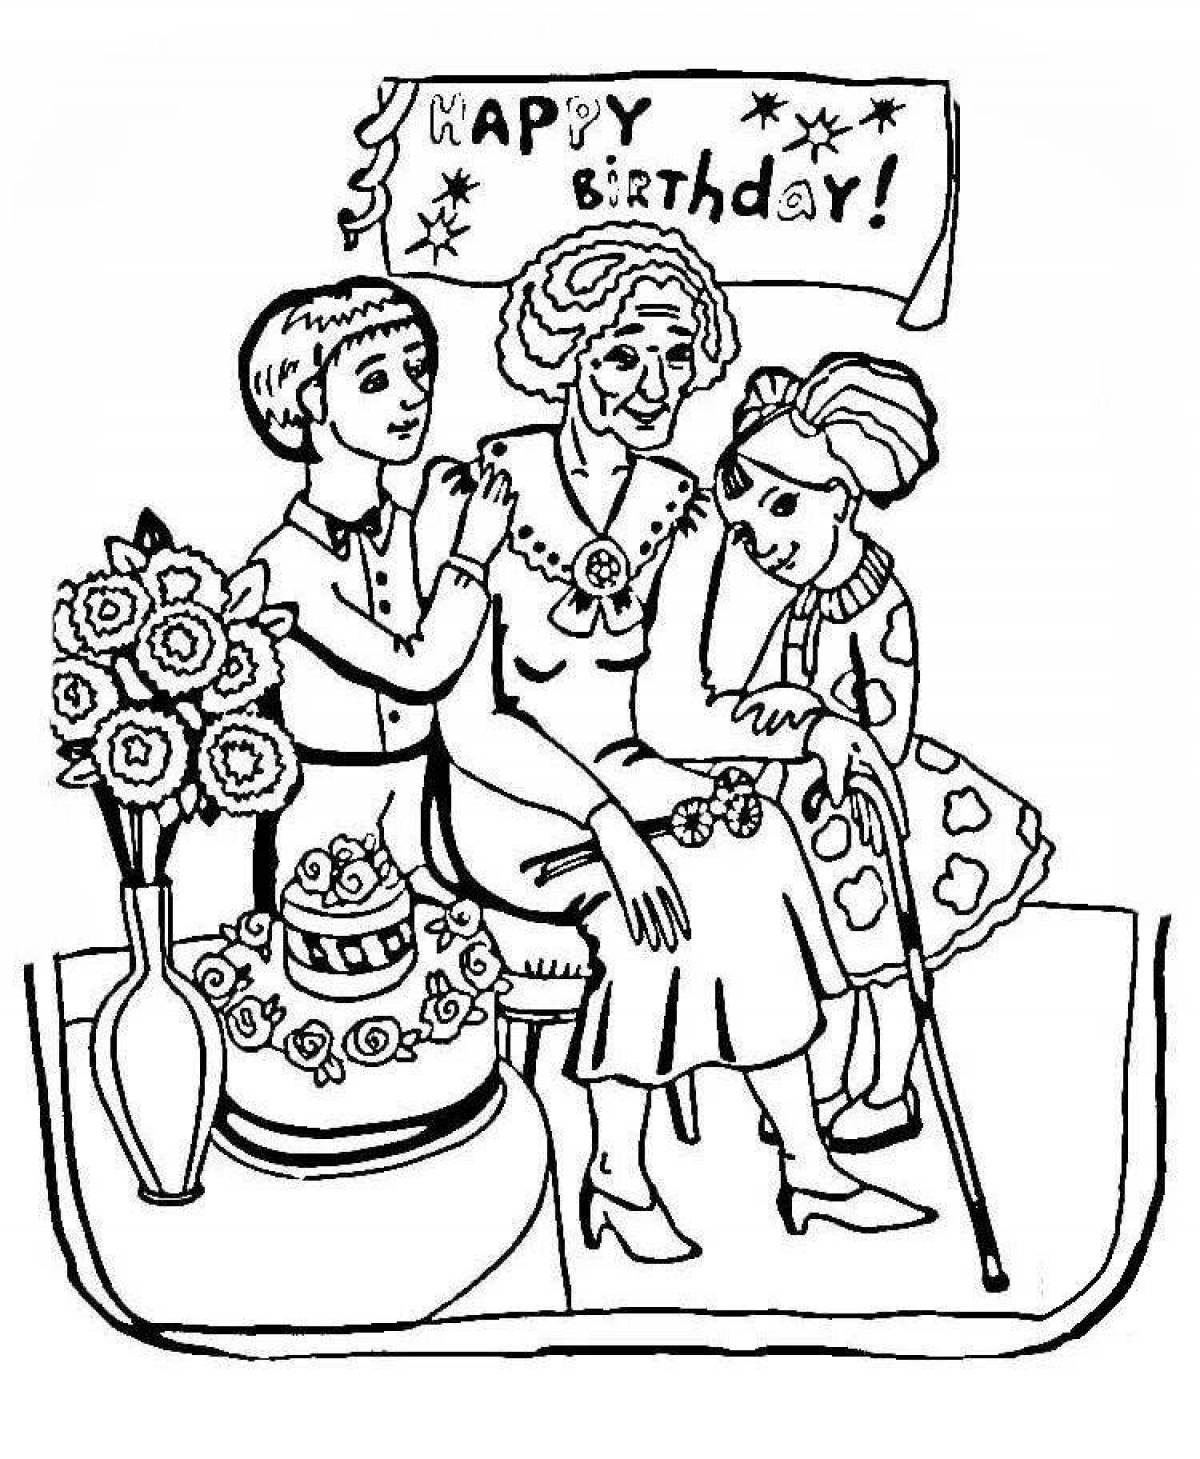 Glorified grandmother's birthday coloring page